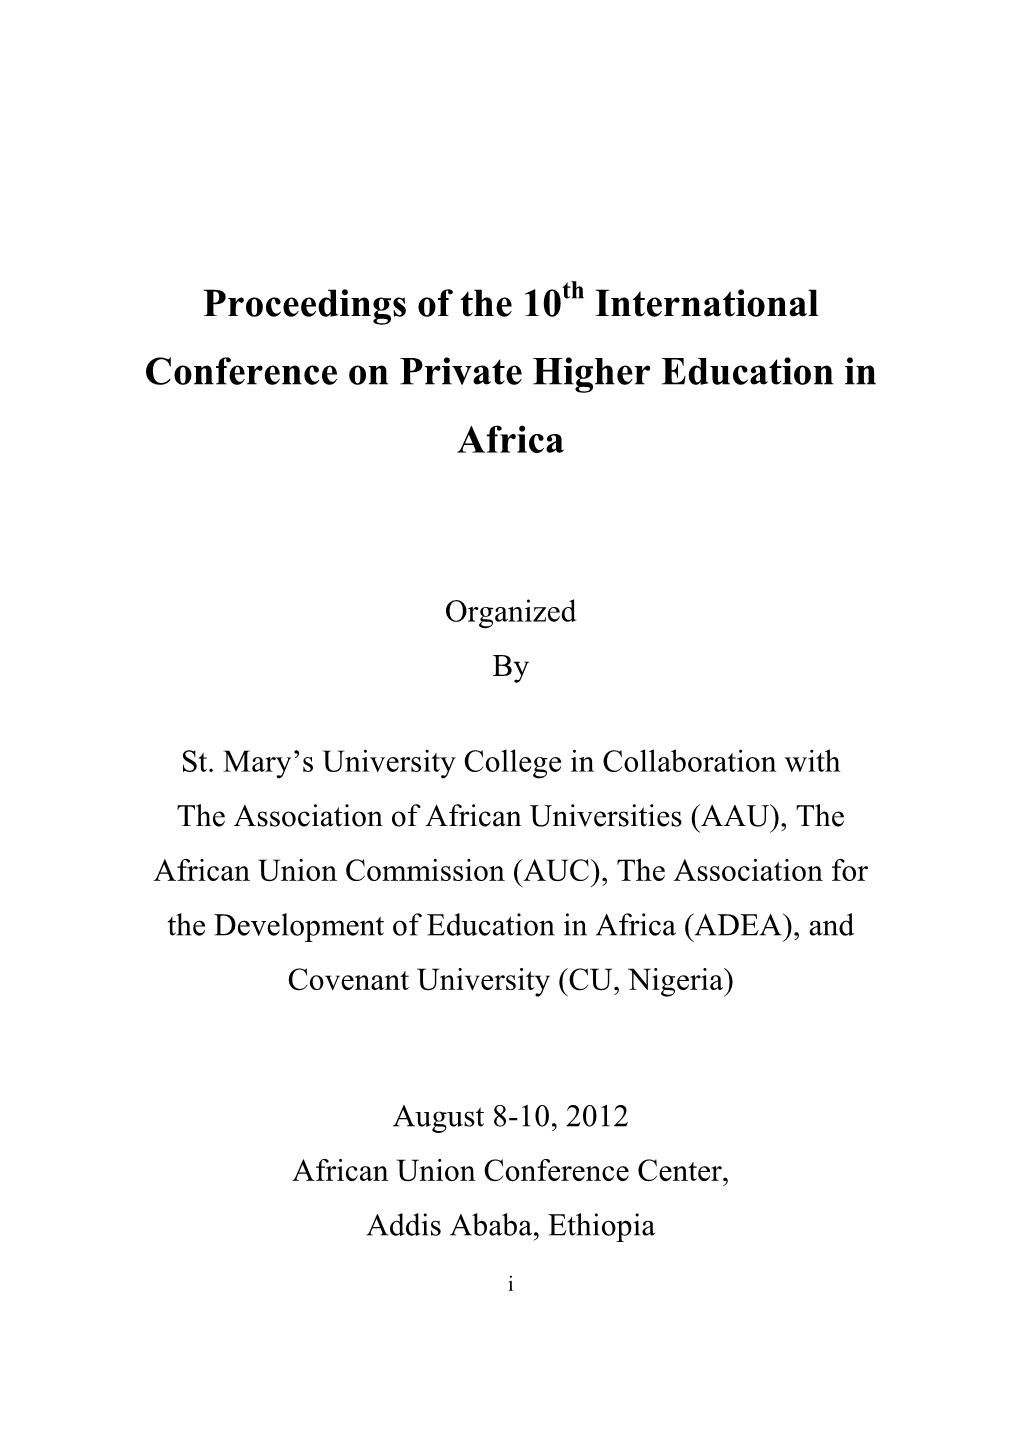 Proceedings of the 10 International Conference on Private Higher